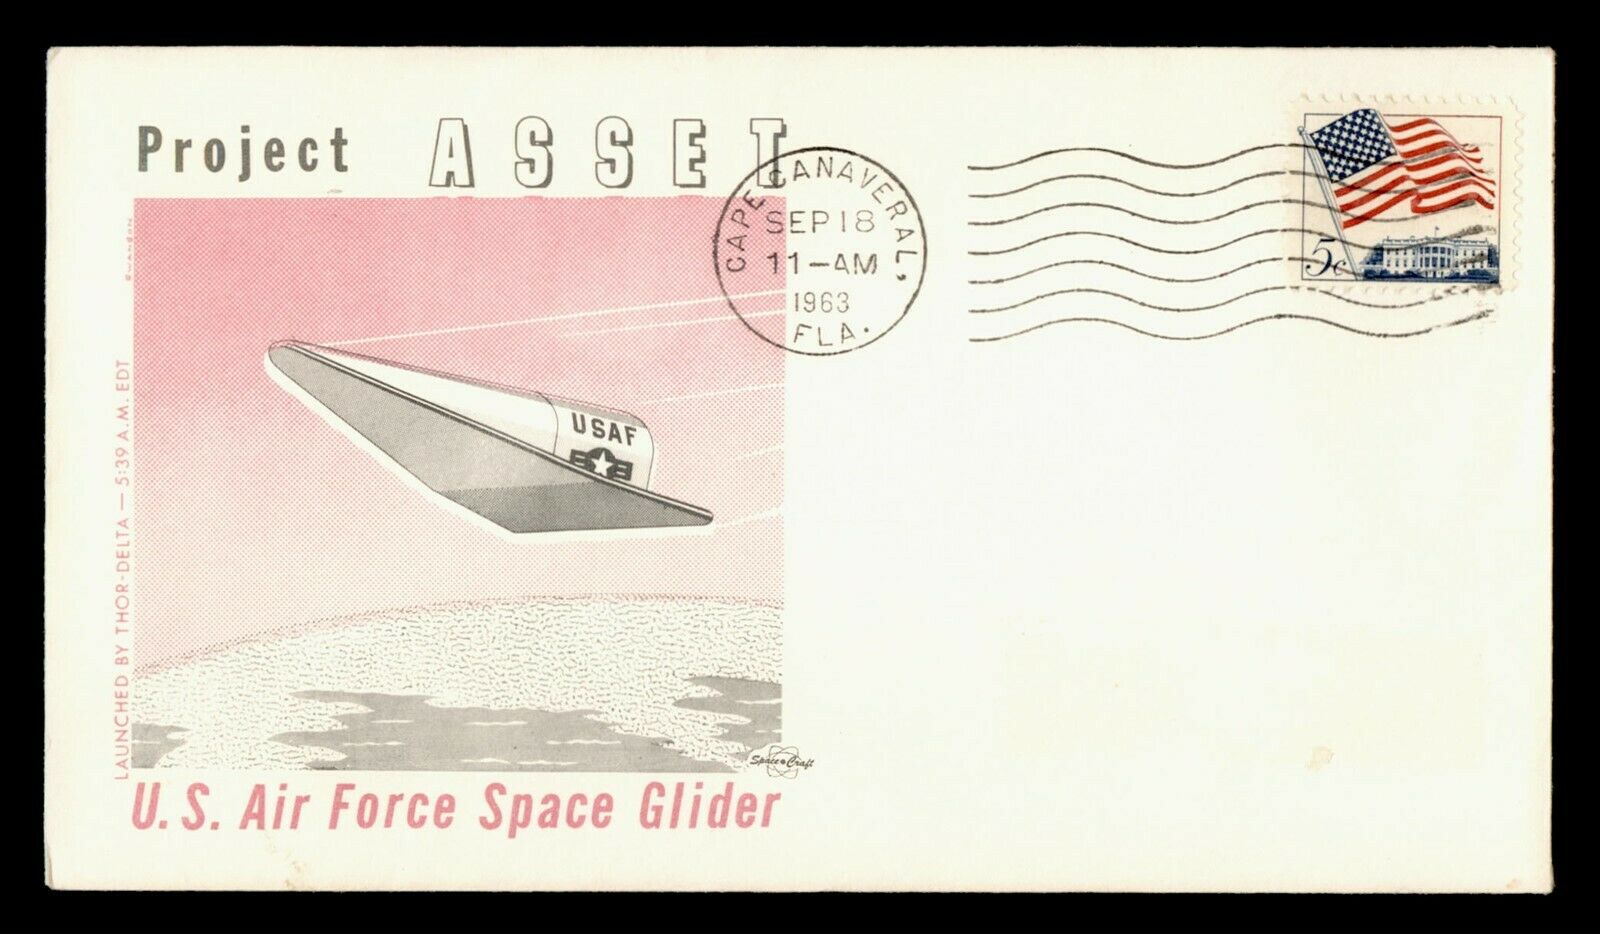 Dr Who 1963 Cape Canaveral Fl Project Asset Space Glider Cachet  G24496